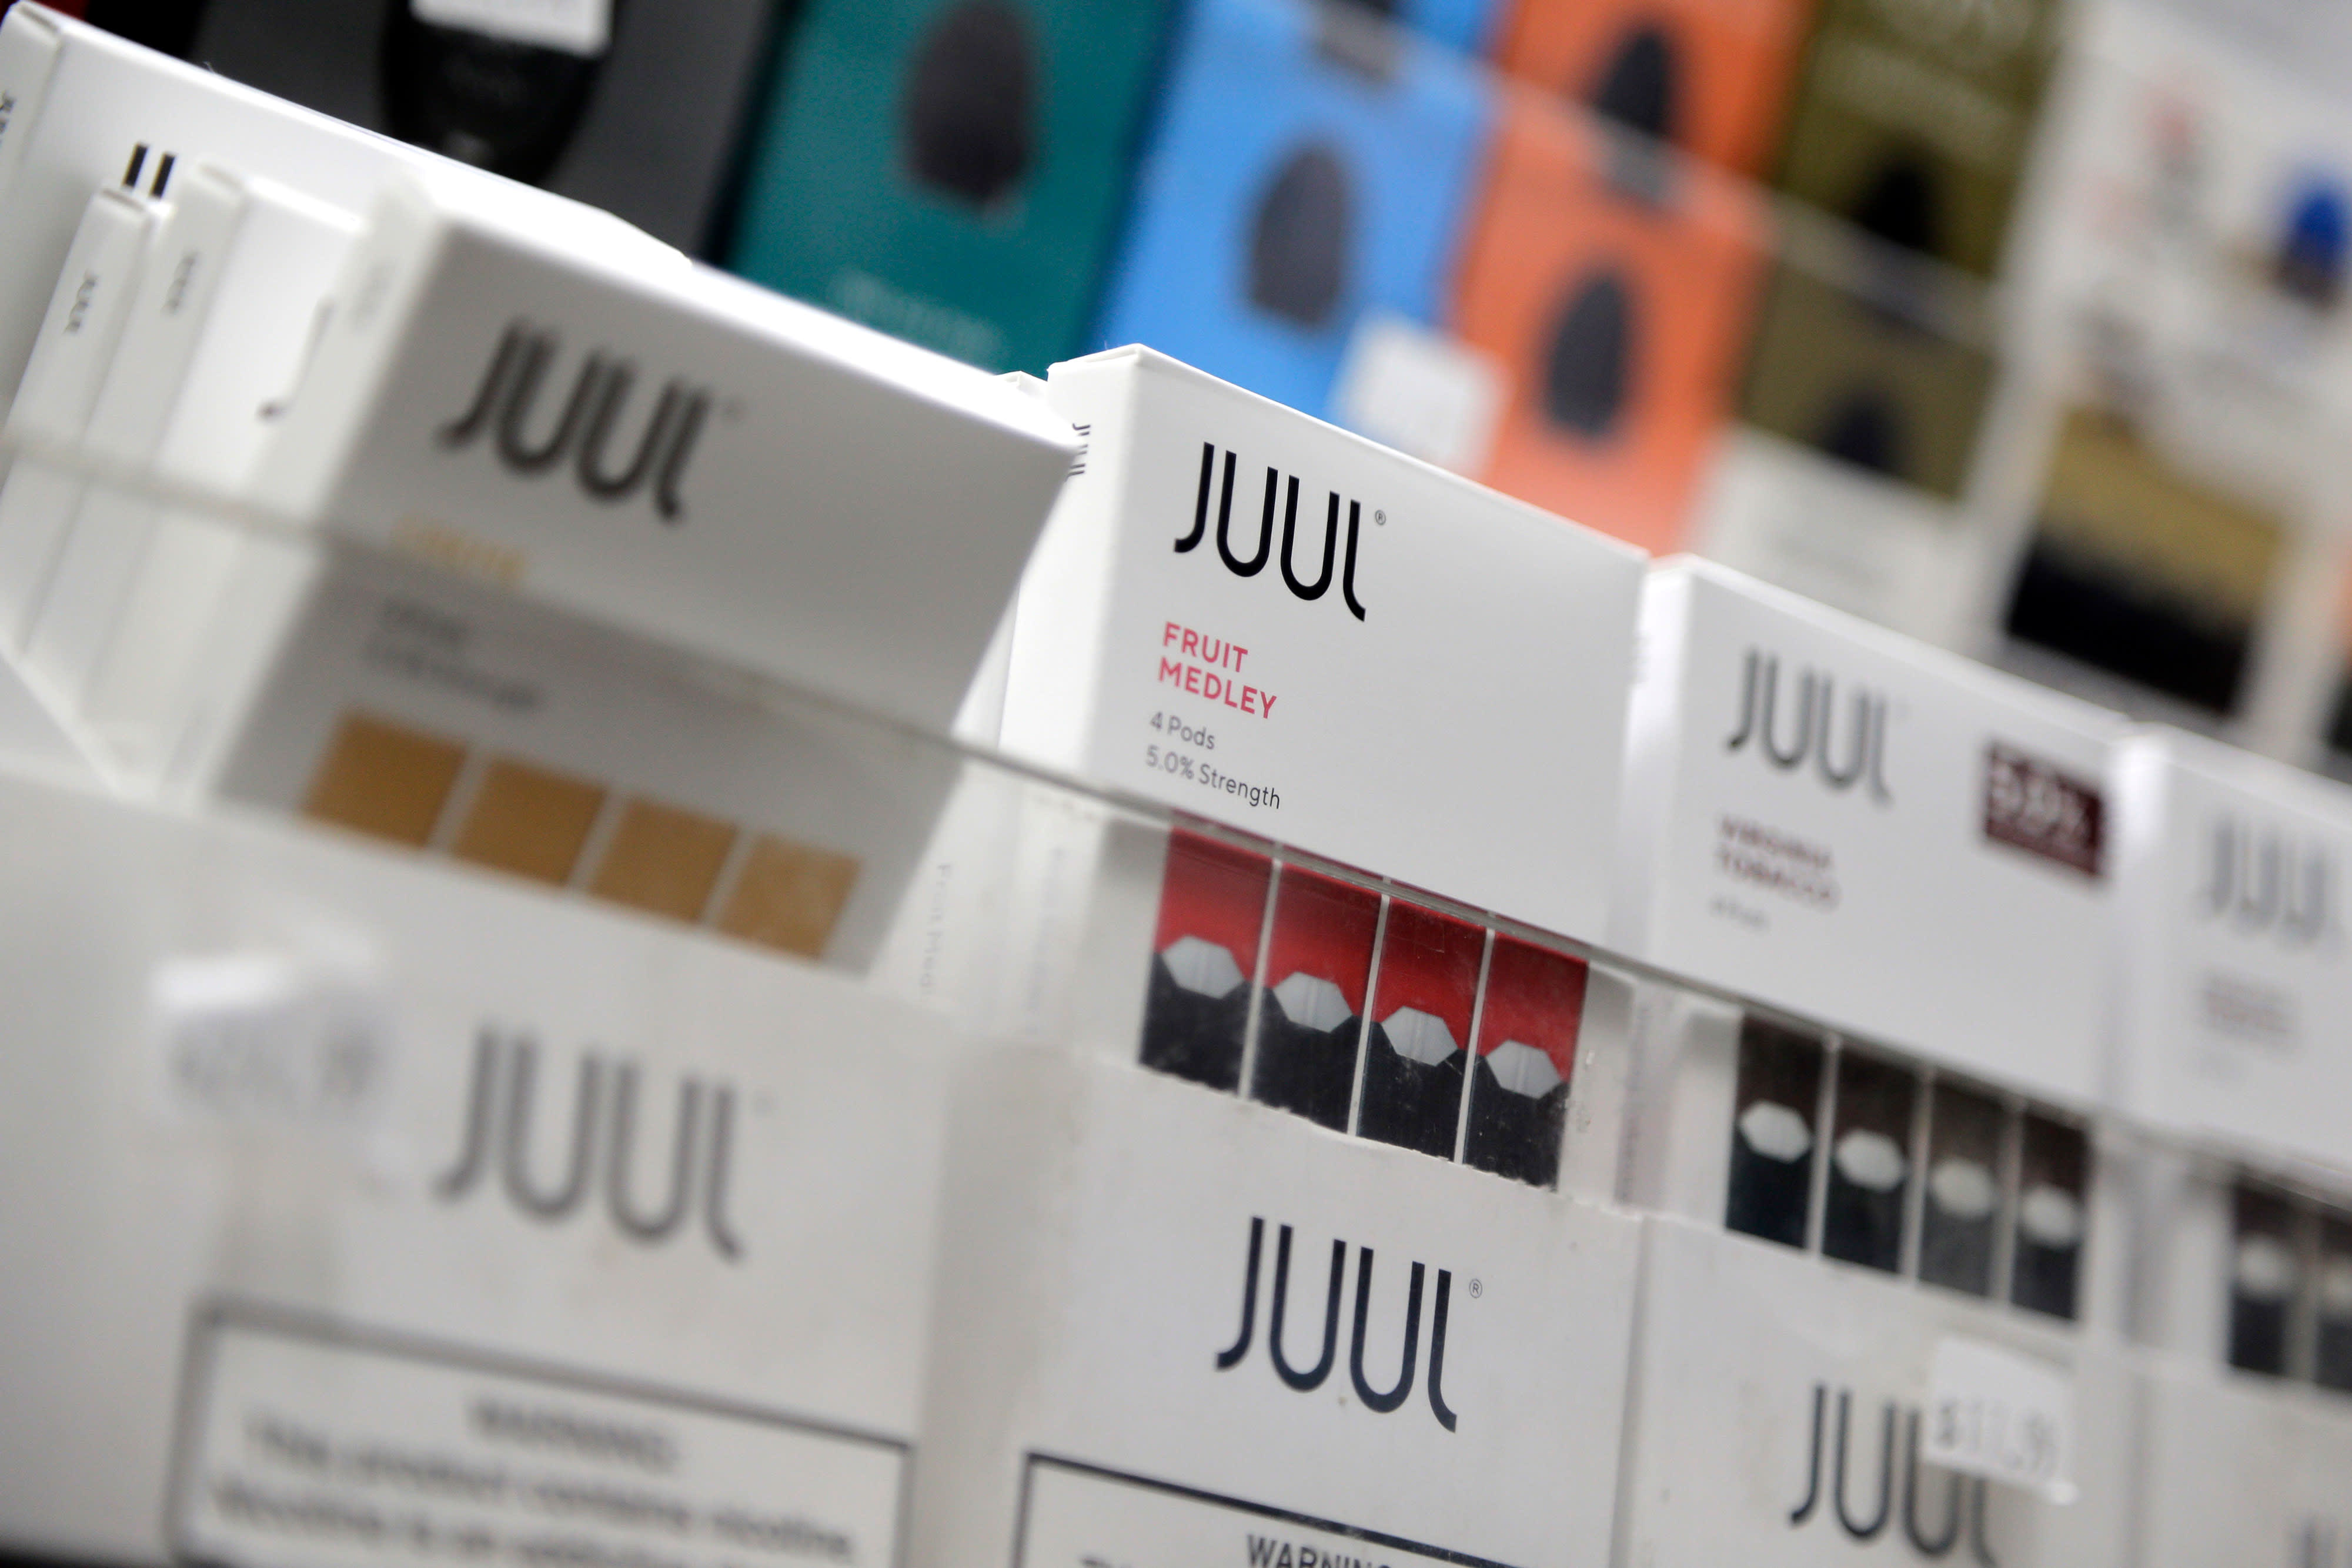 Juul reduces cigarette smoking risk similar to quitting, study shows4000 x 2667